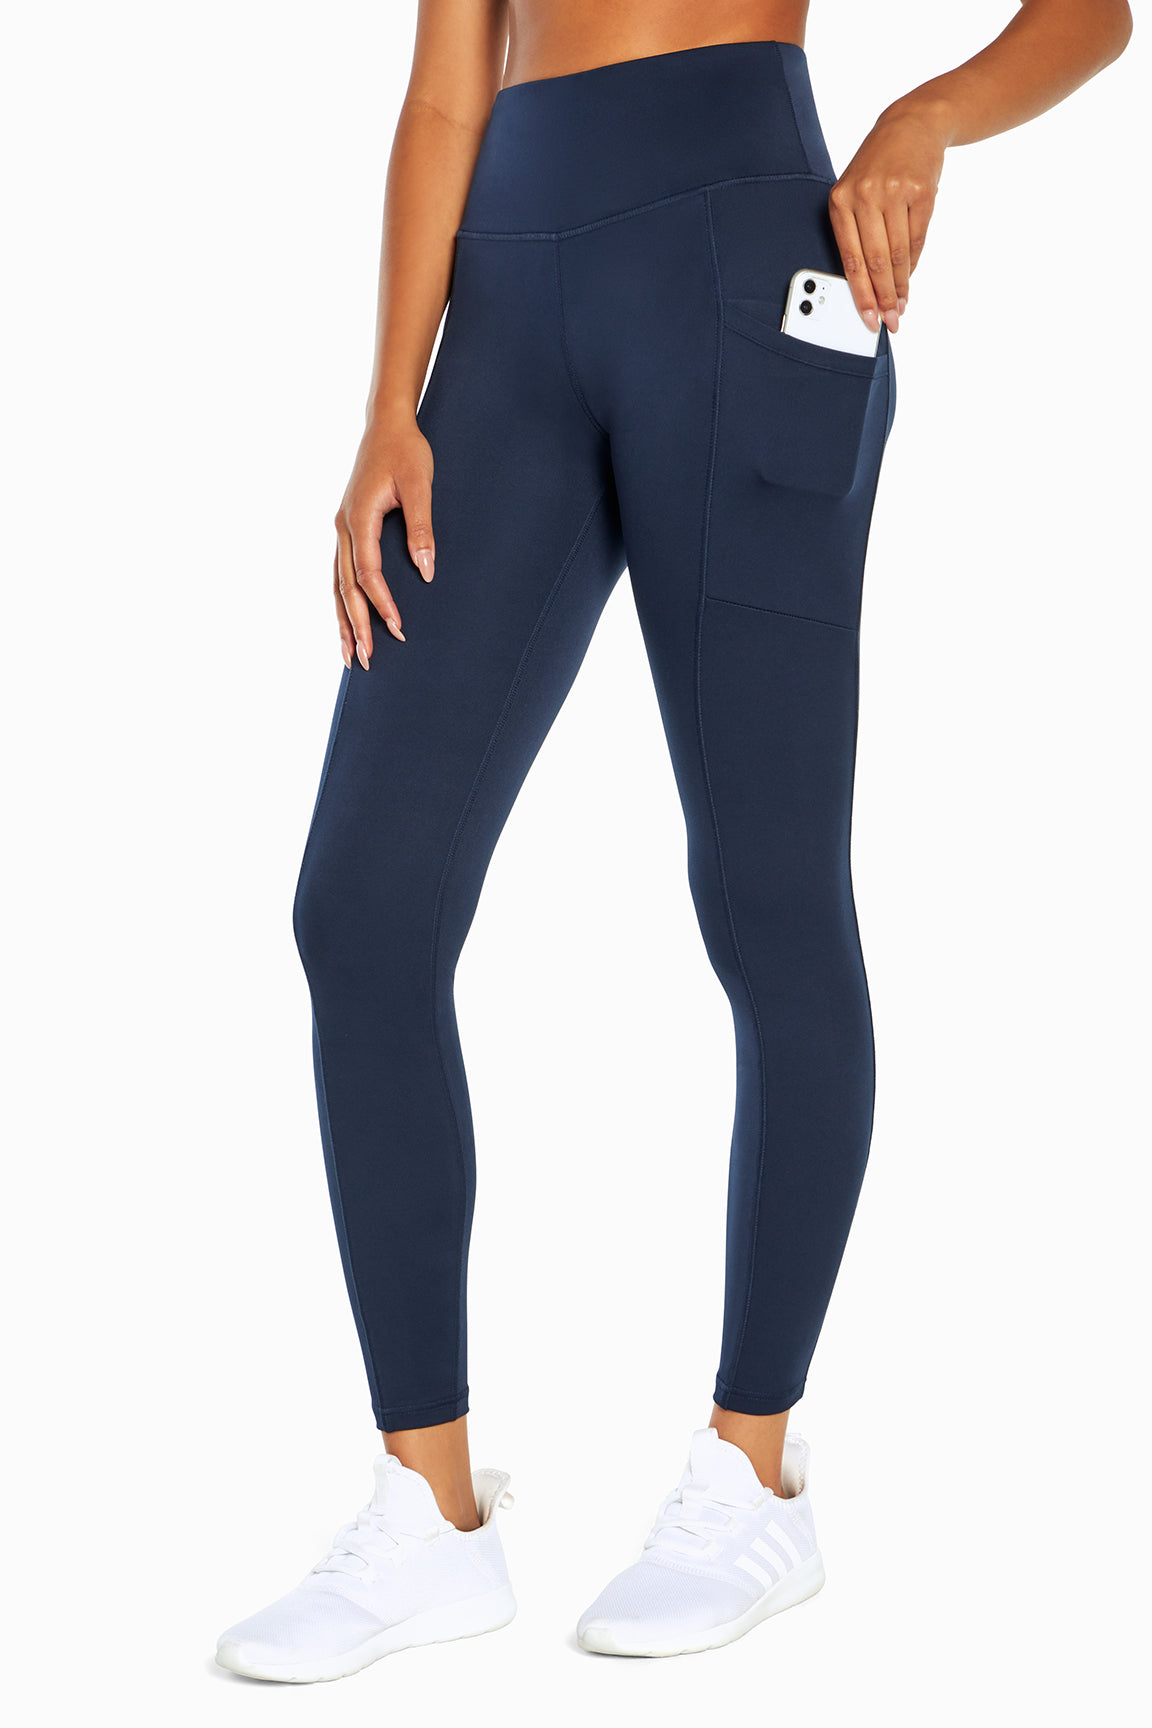 Women's White Sports Leggings - Stay Comfortable and Stylish